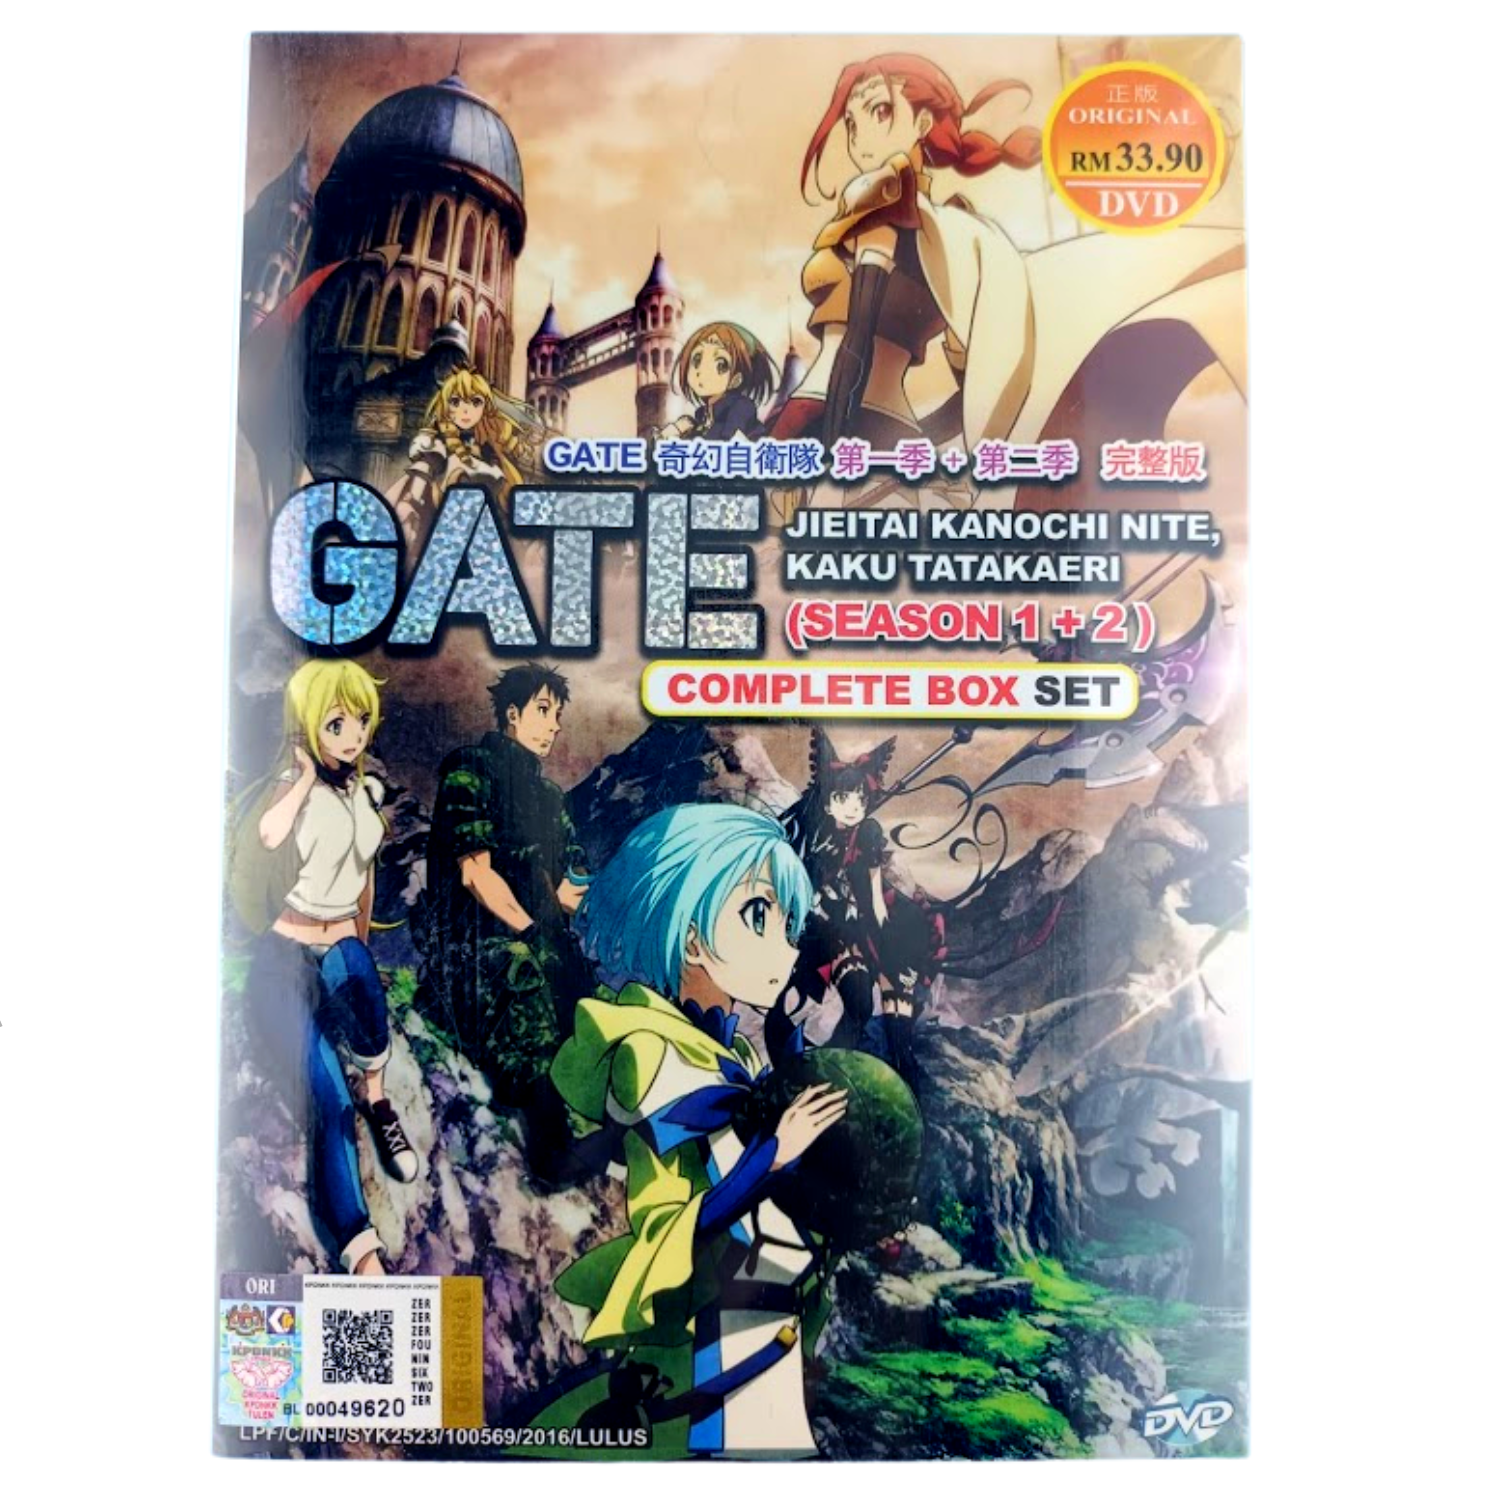 Aggregate more than 78 gate anime series best - awesomeenglish.edu.vn